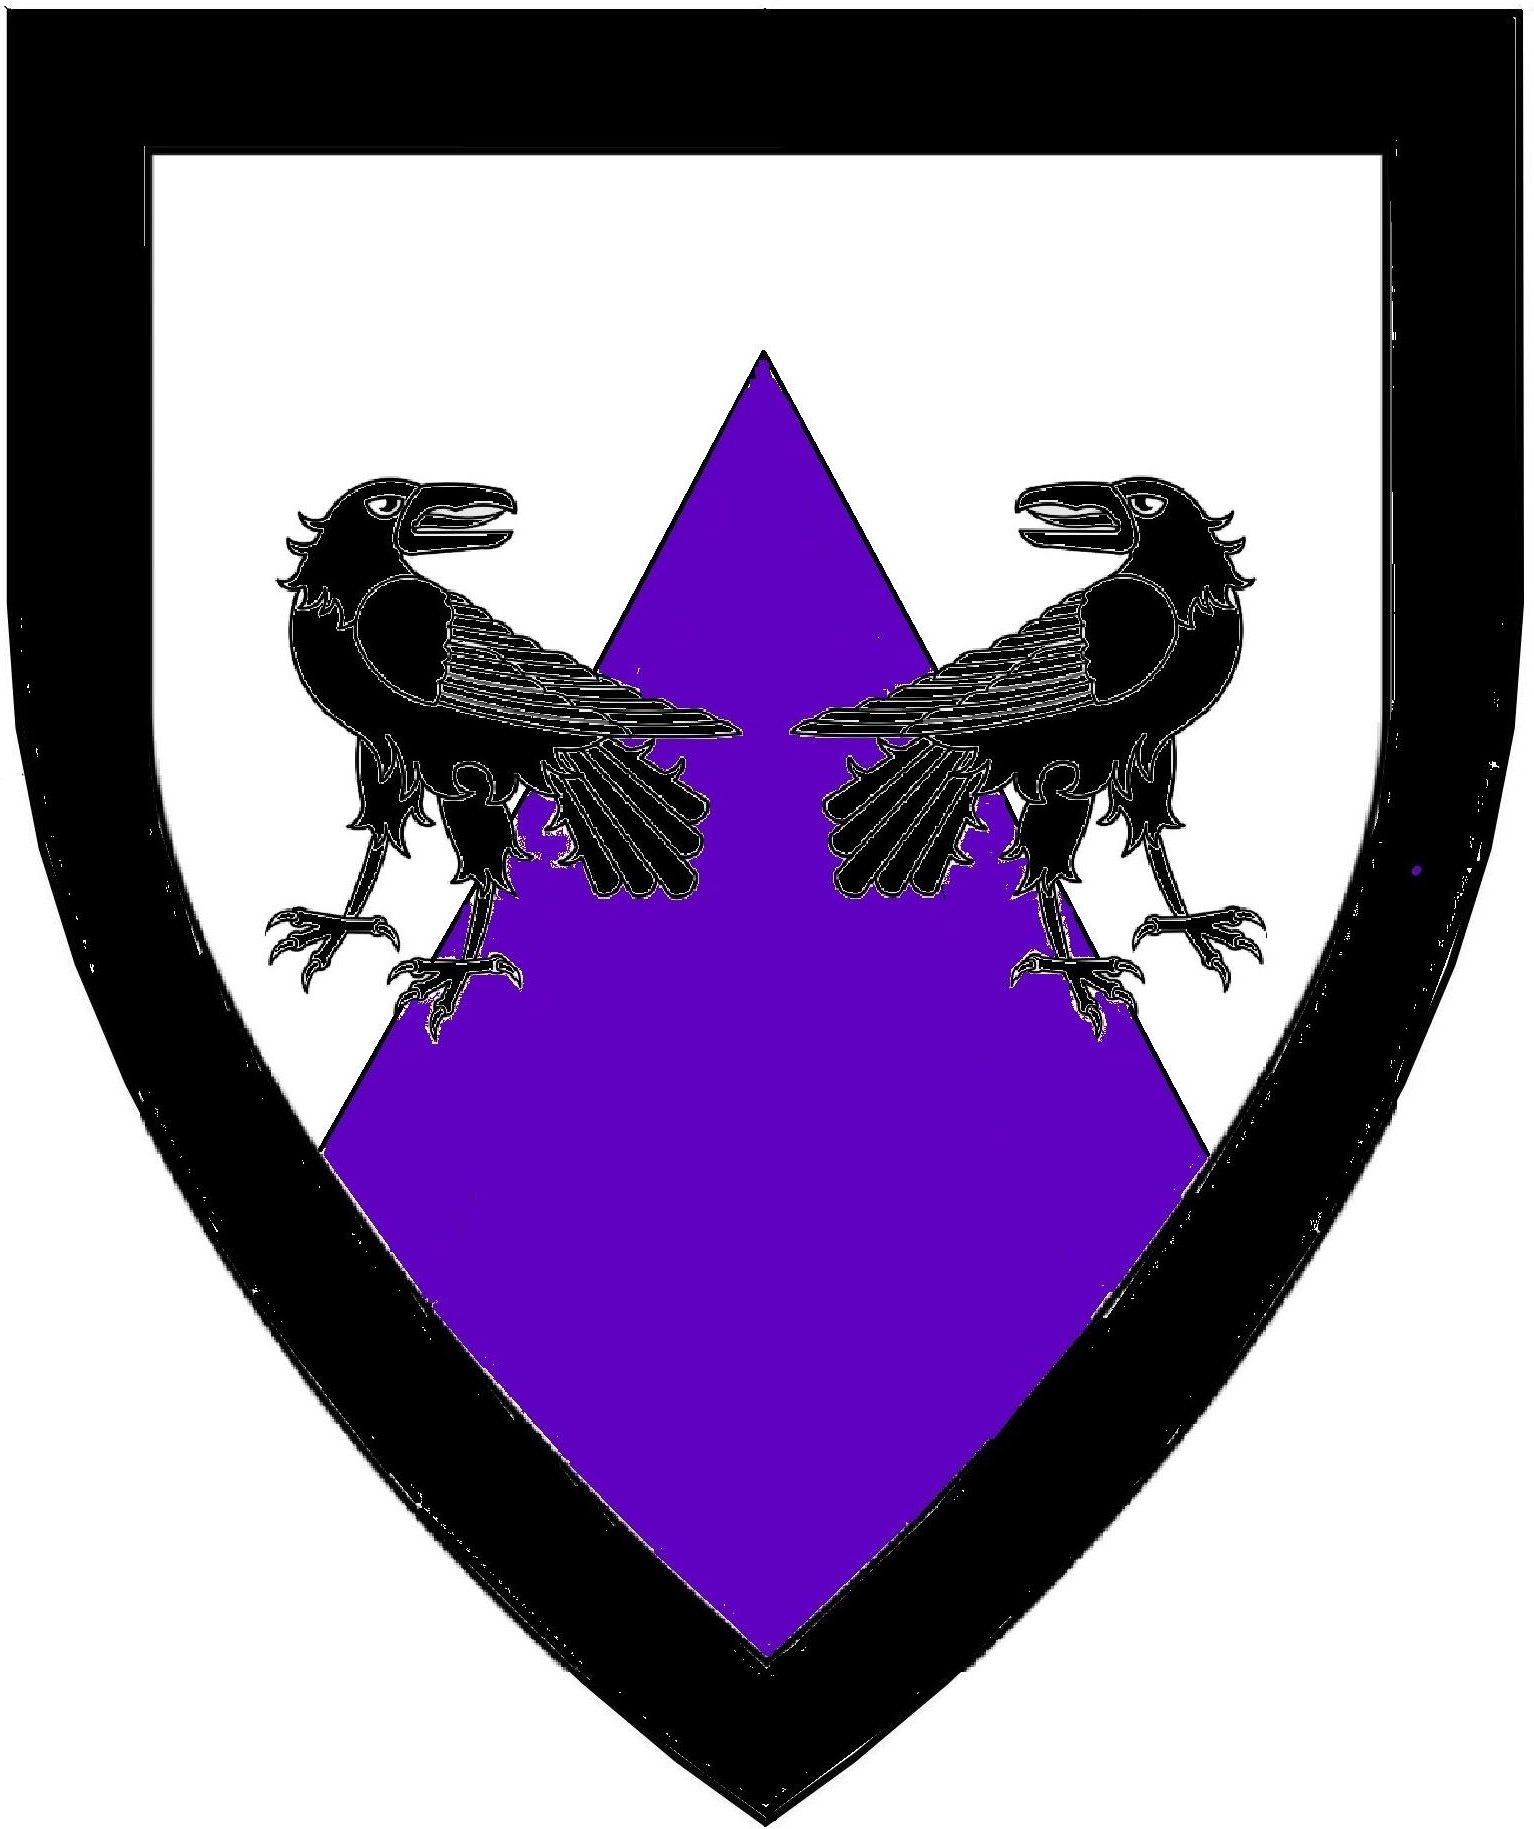 Per chevron argent and purpure, two ravens addorsed regardant within a bordure sable.